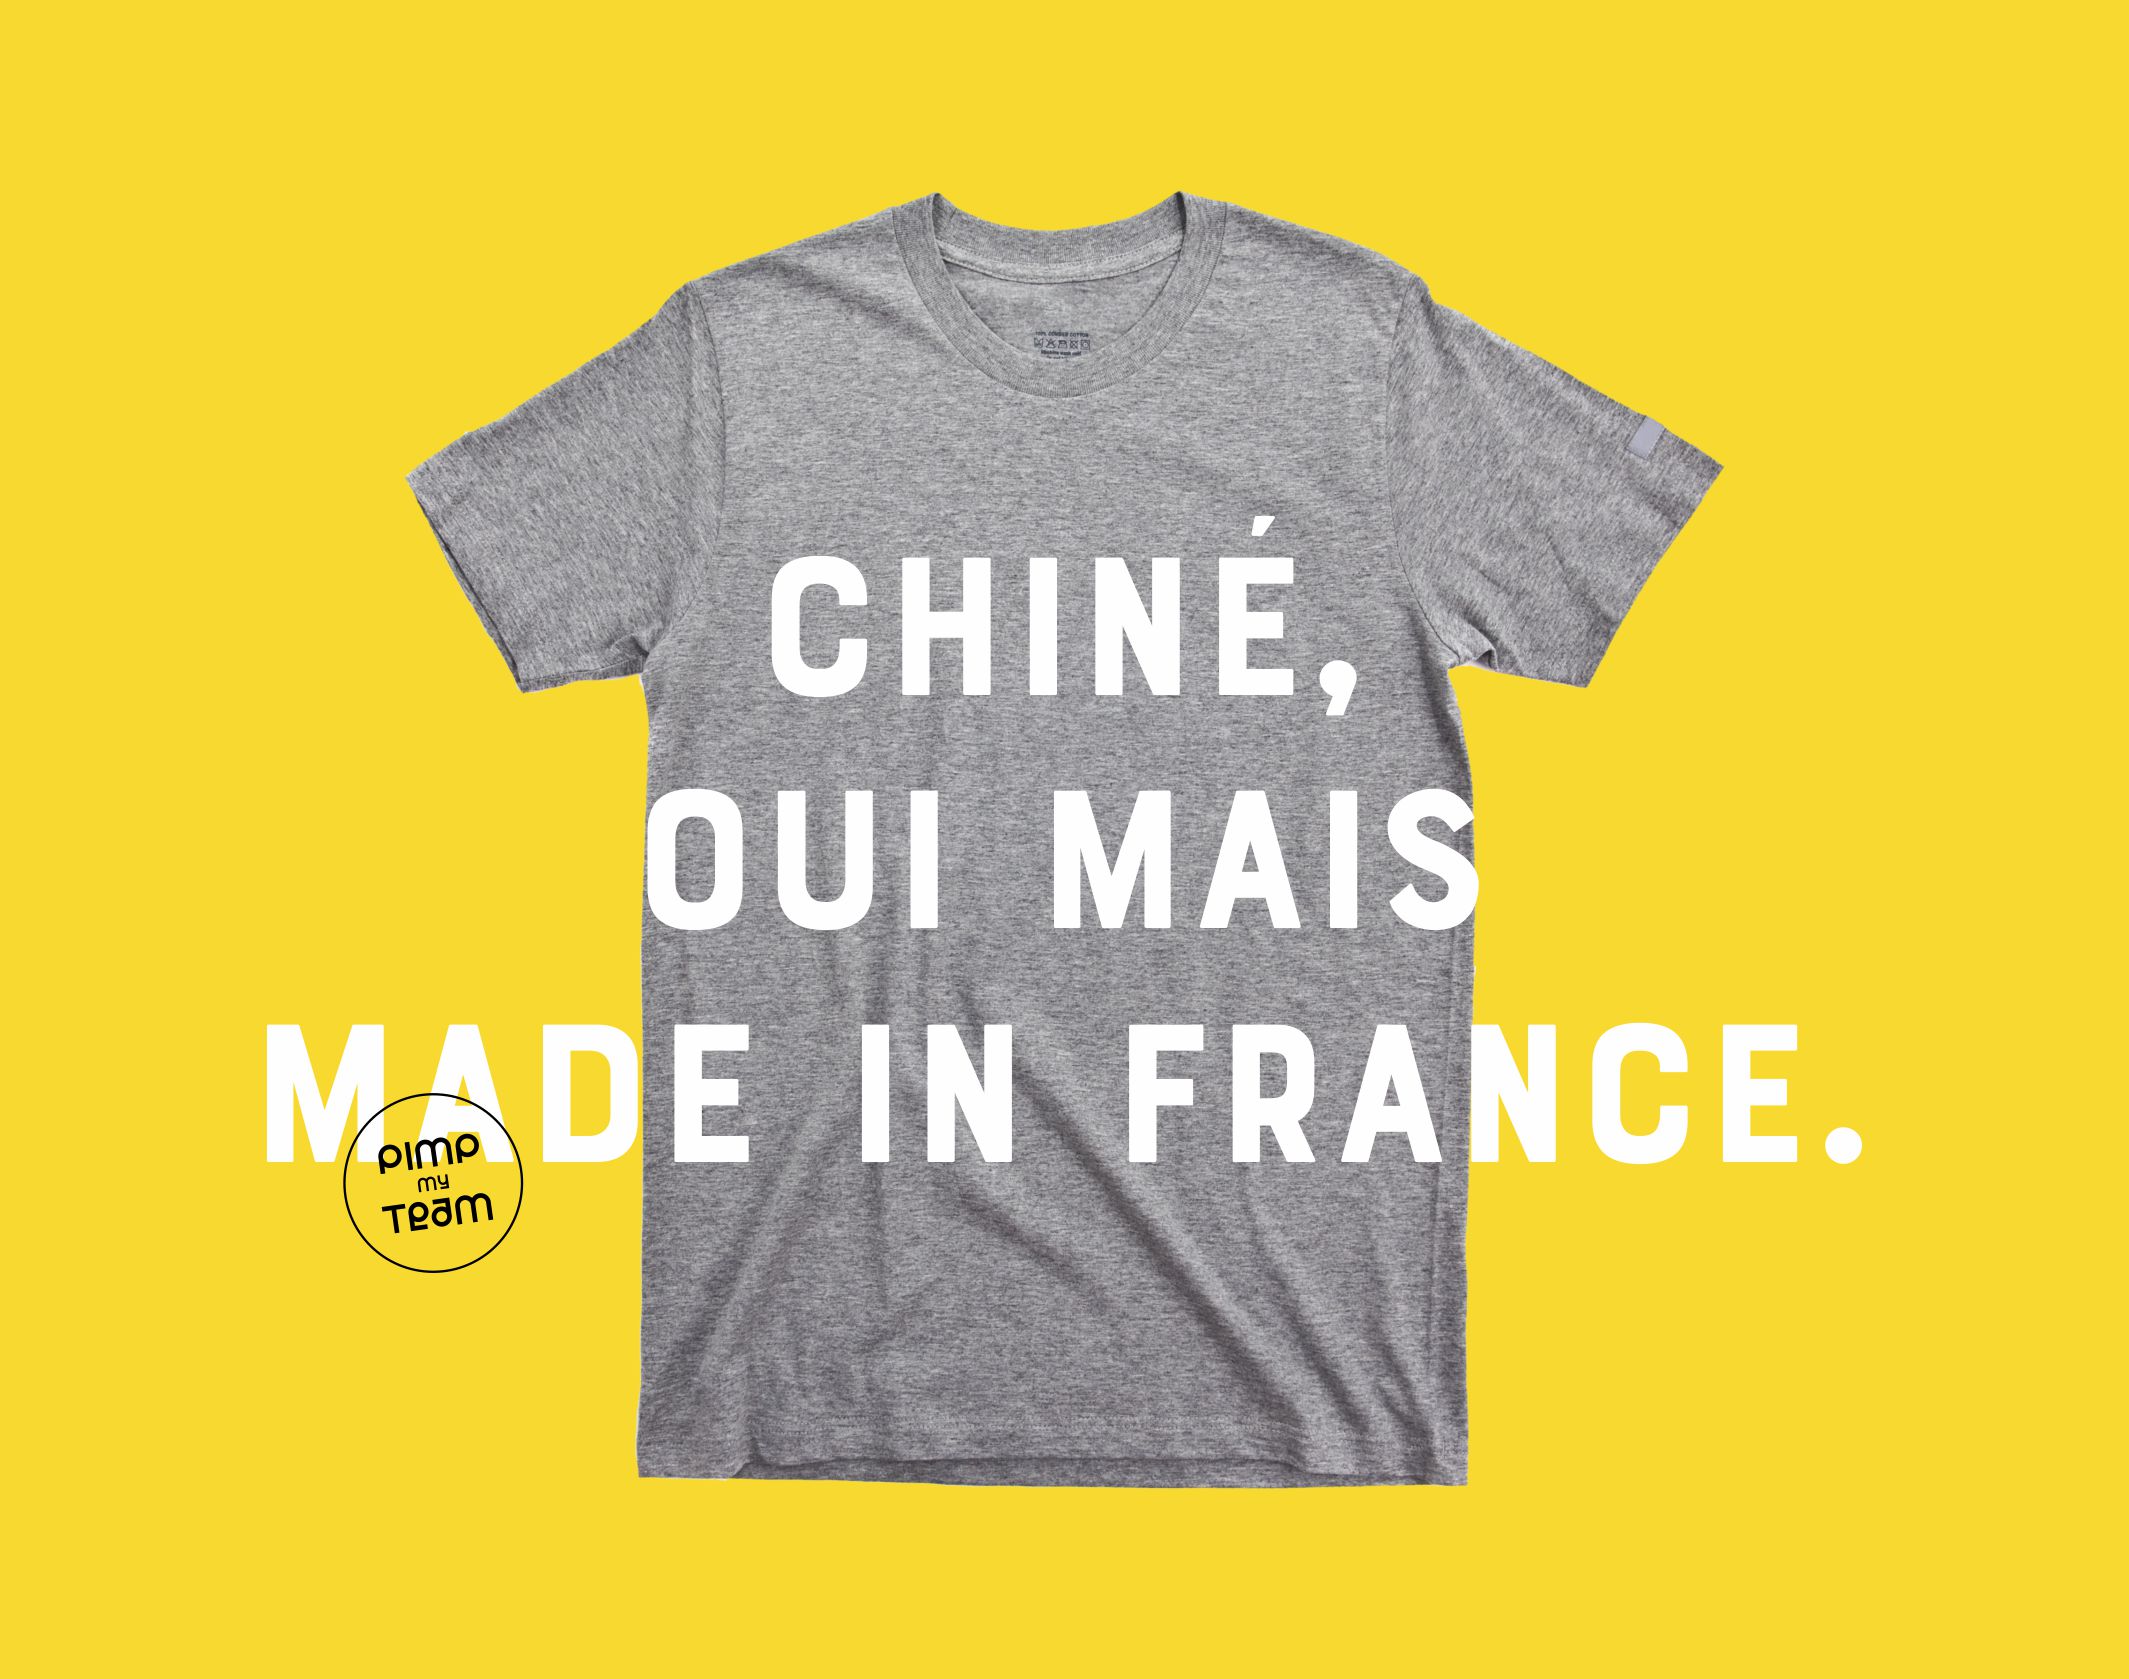 Claim : Chiné, oui mais made in France